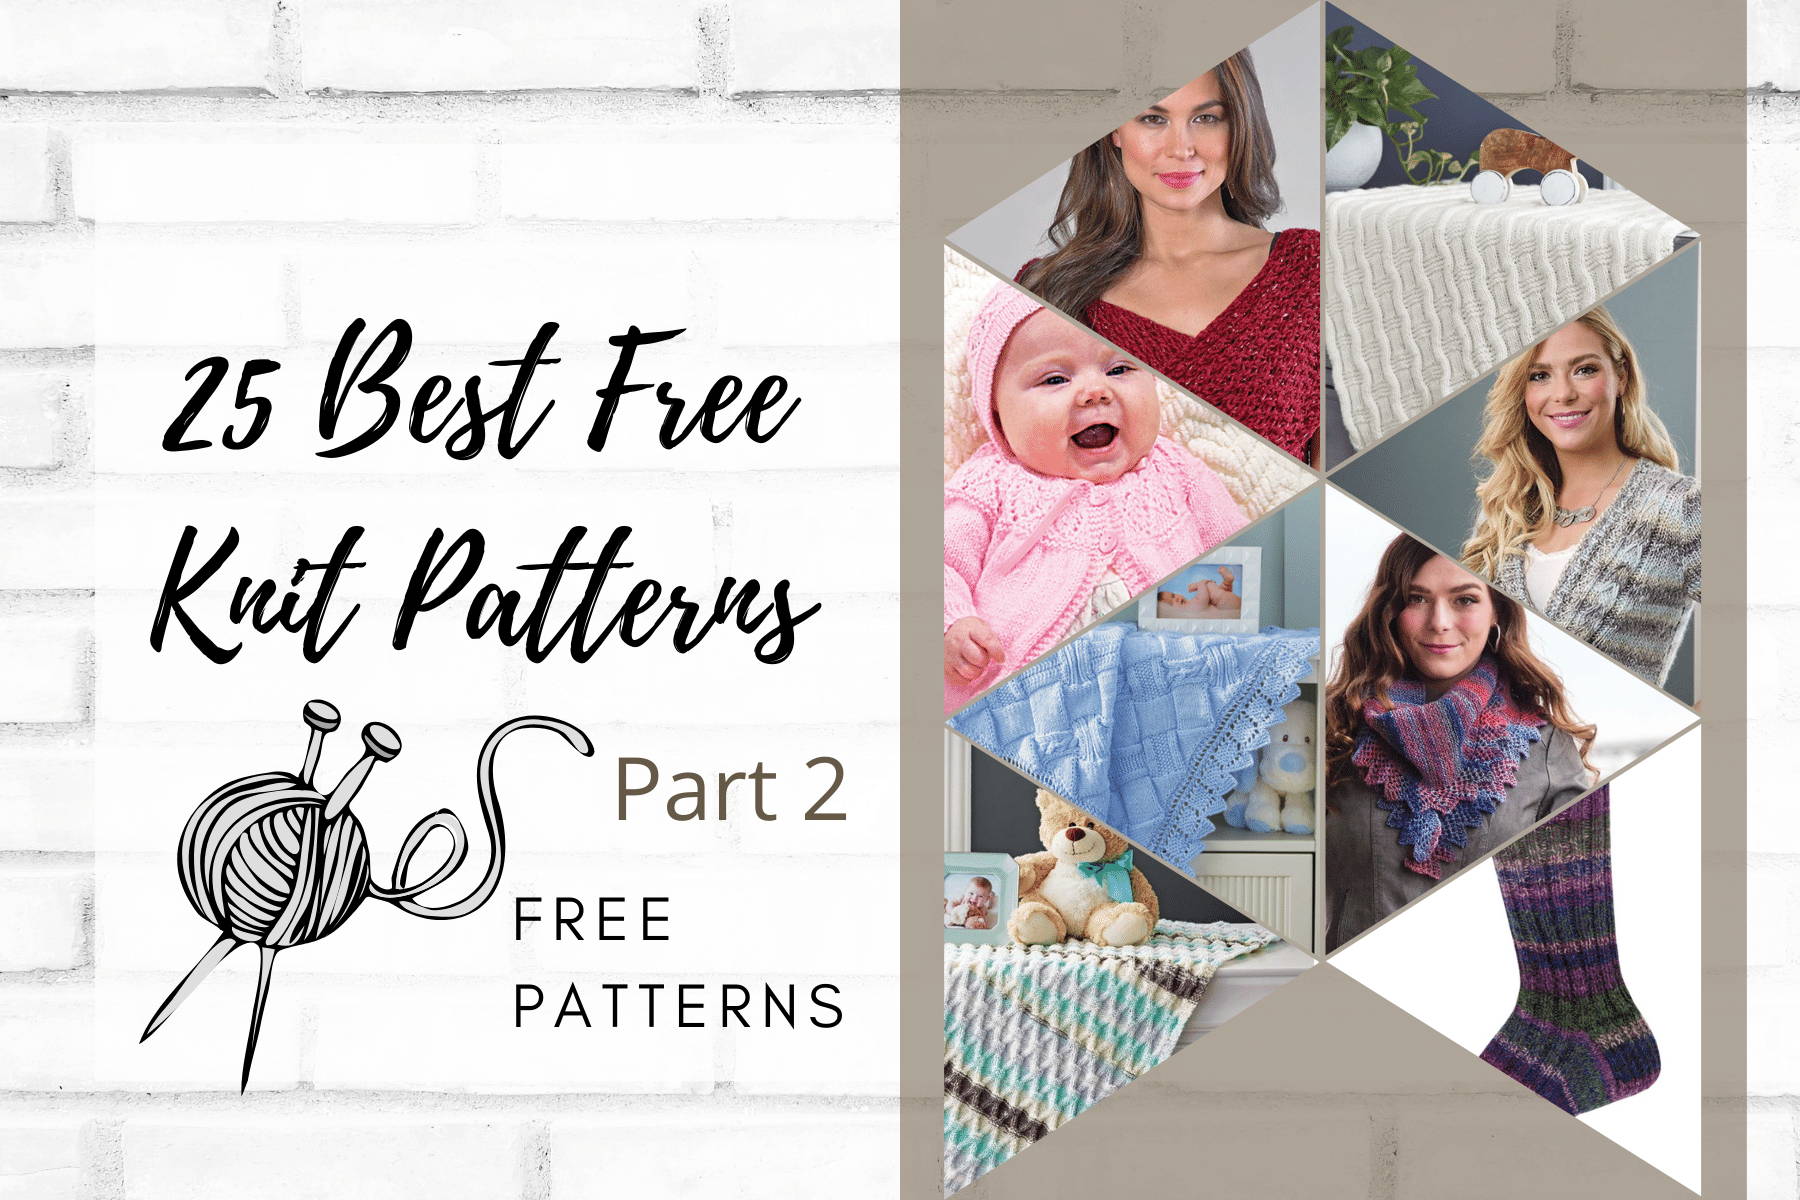 25 Best Free Knit Patterns by Mary Maxim